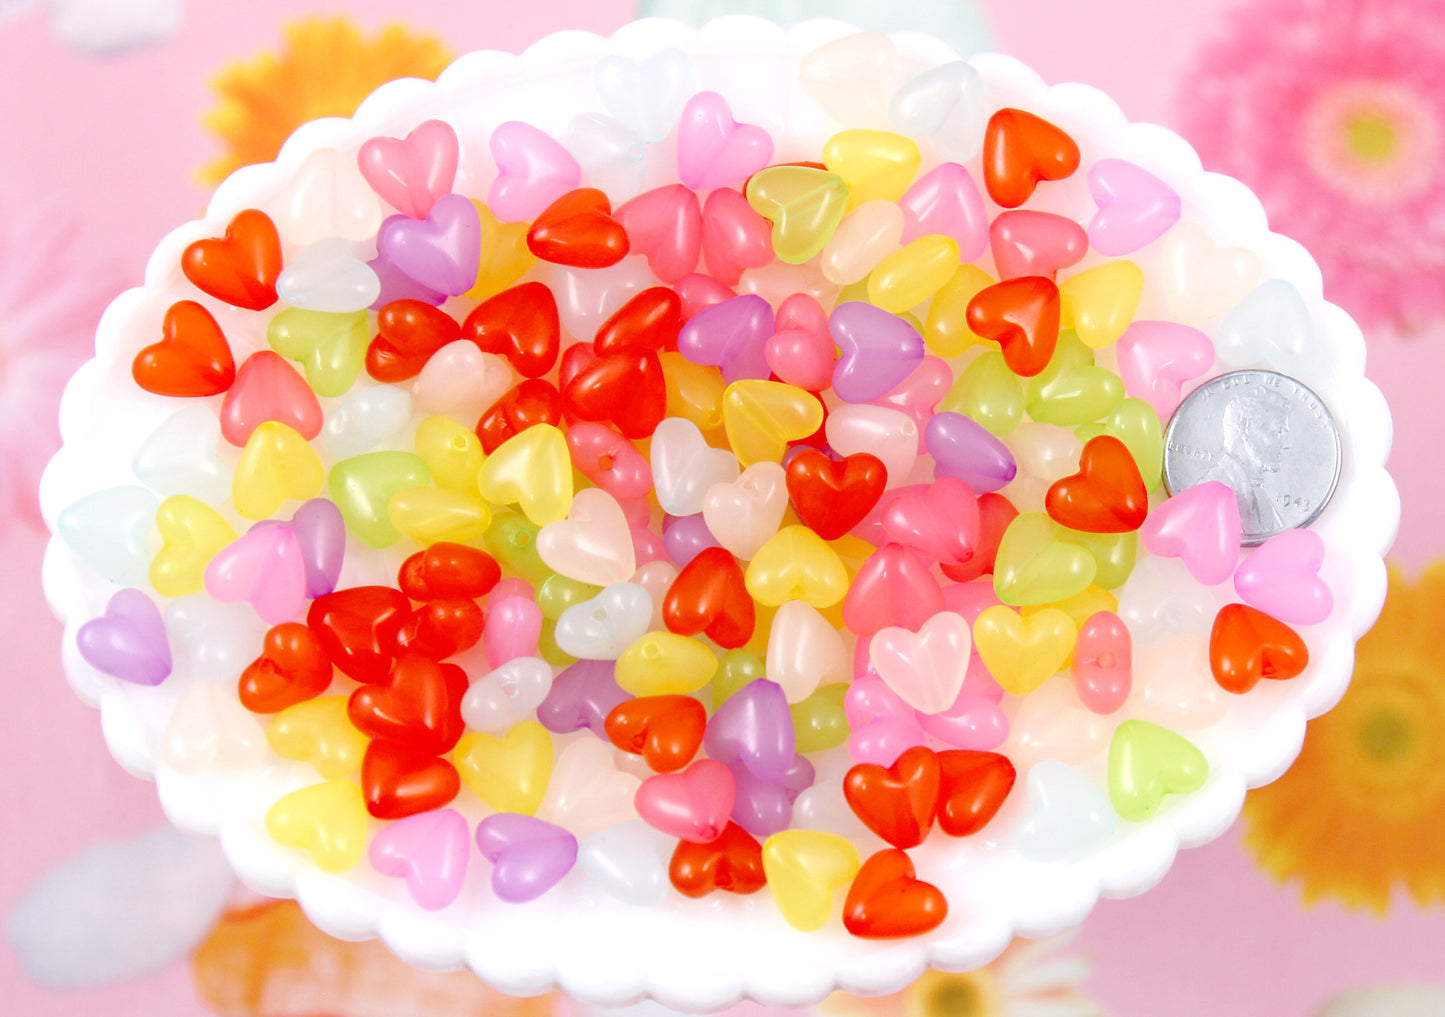 Jelly Heart Beads - 10mm Small Jelly Color Hearts Bead Translucent Rounded Plastic Acrylic or Resin Heart Beads - 150 pc set